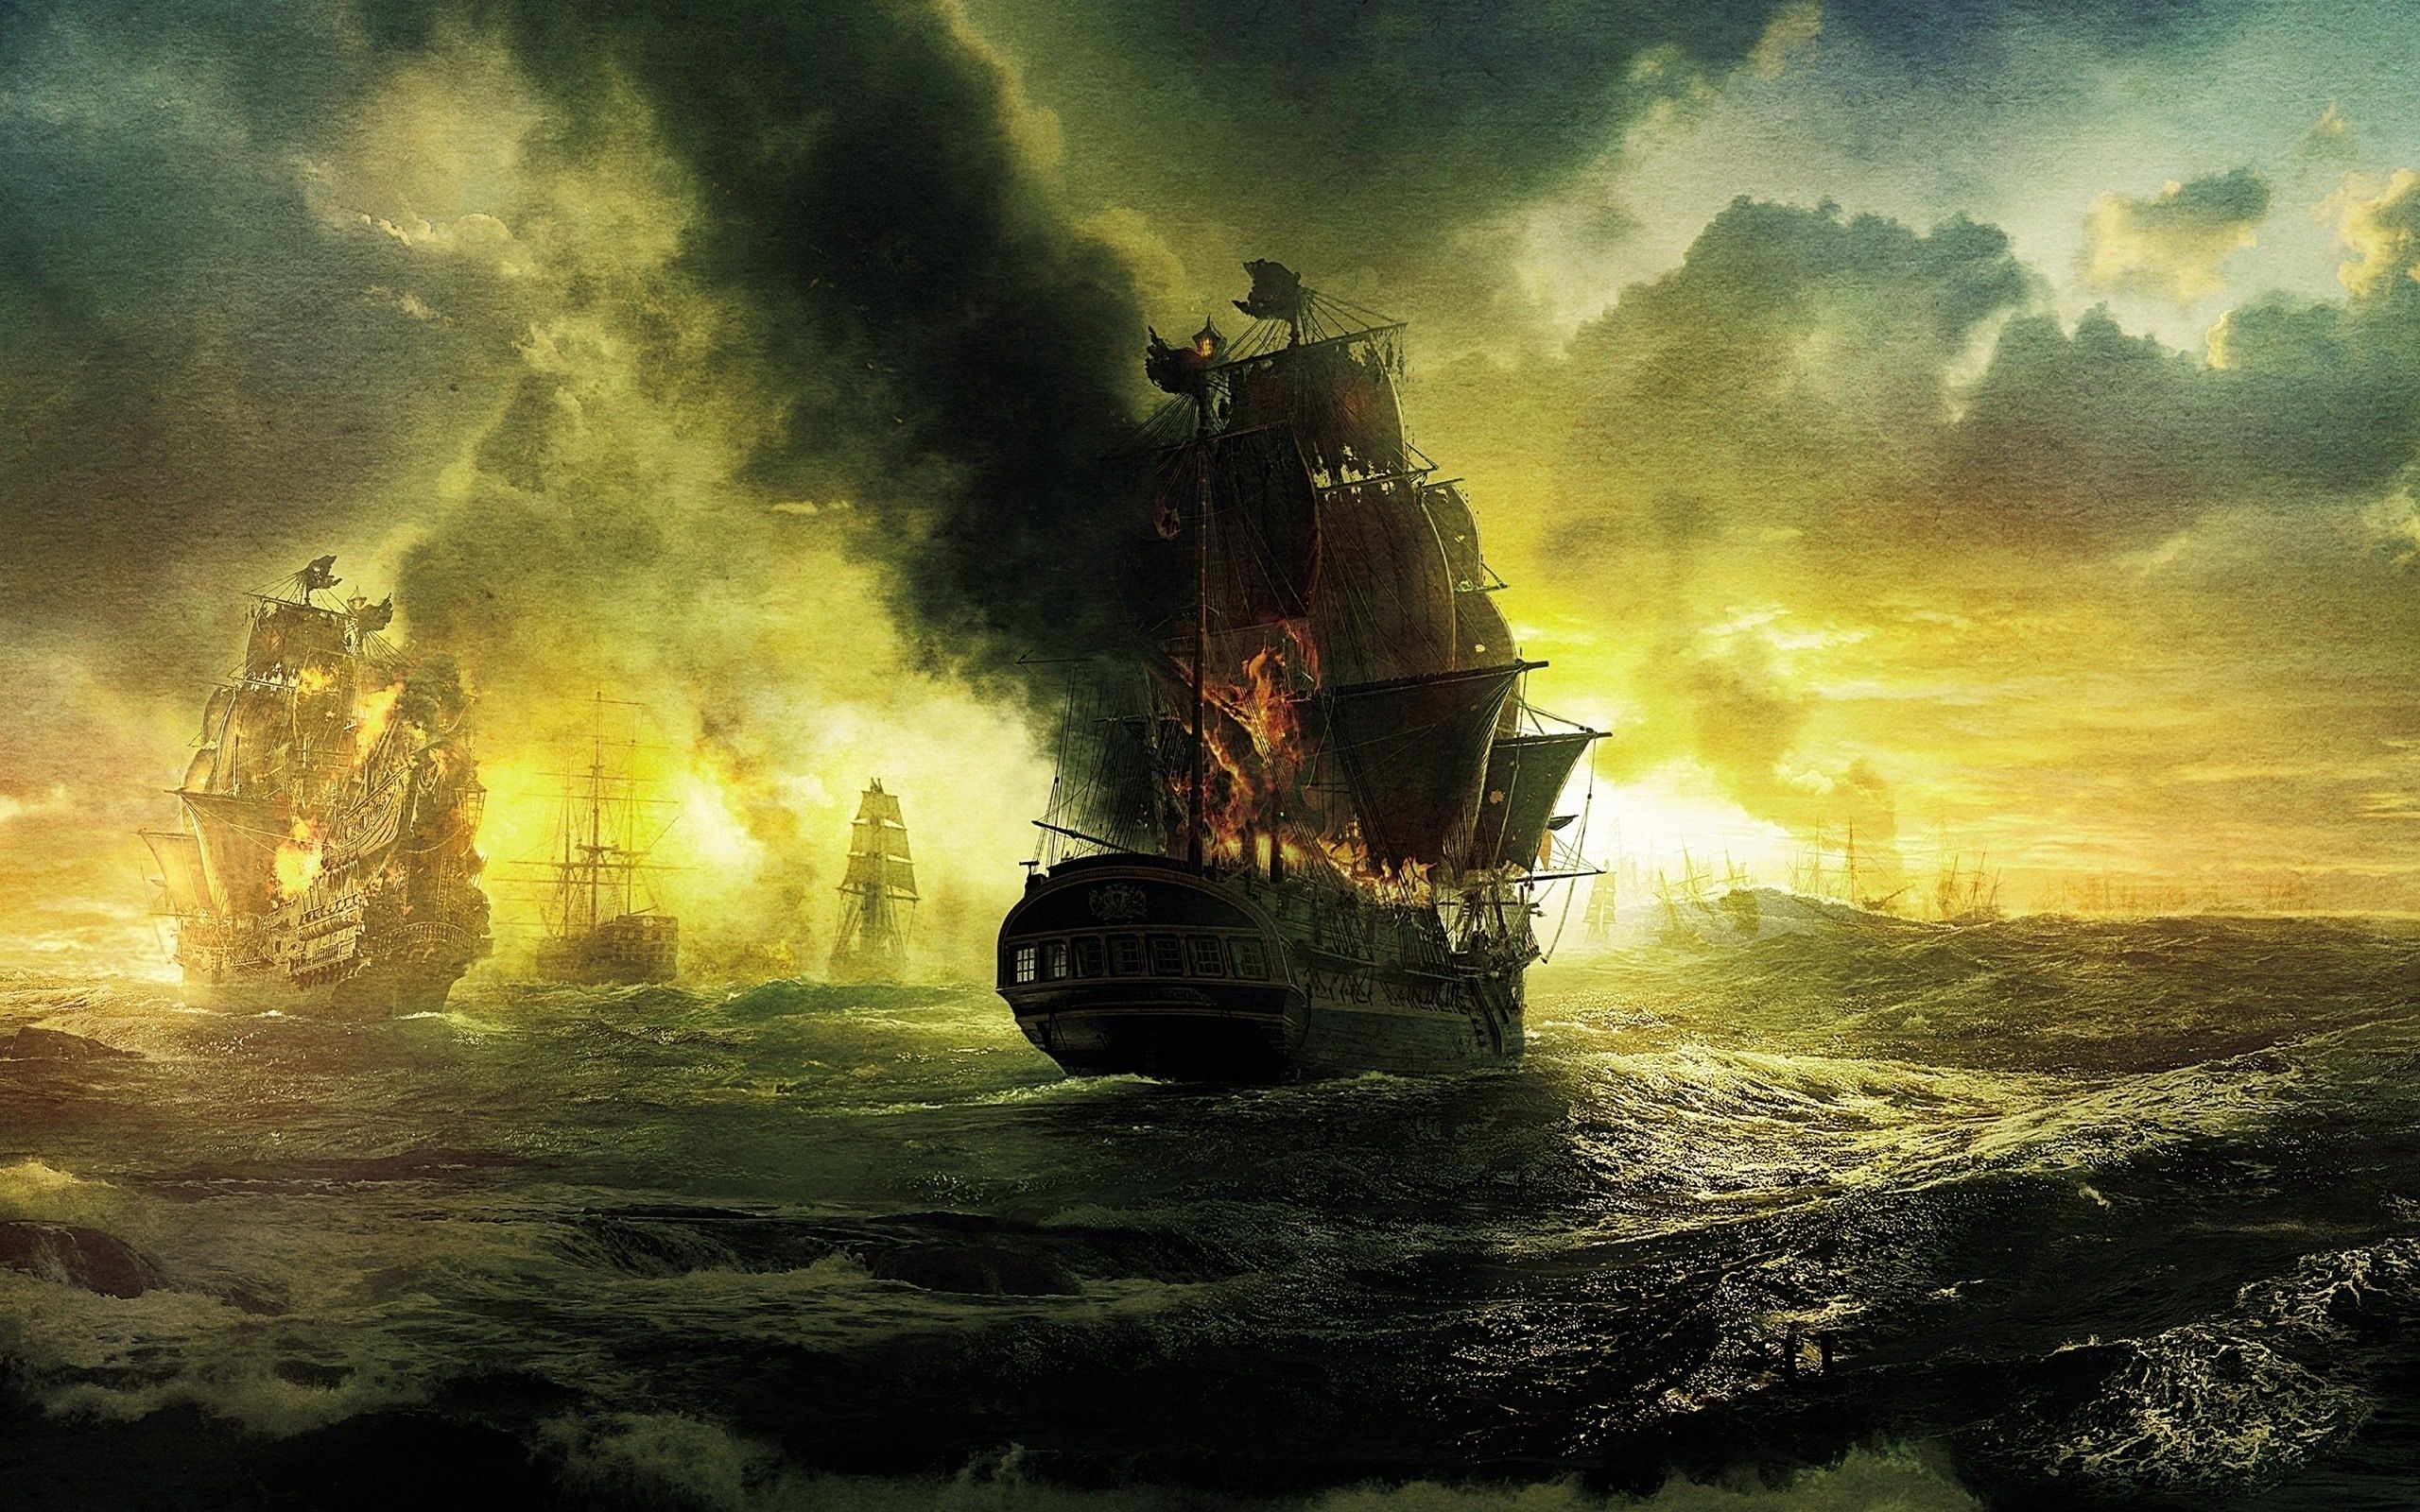 Wallpaper. Movies. photo. picture. on stranger tides, the black pearl, Pirates of the caribbean